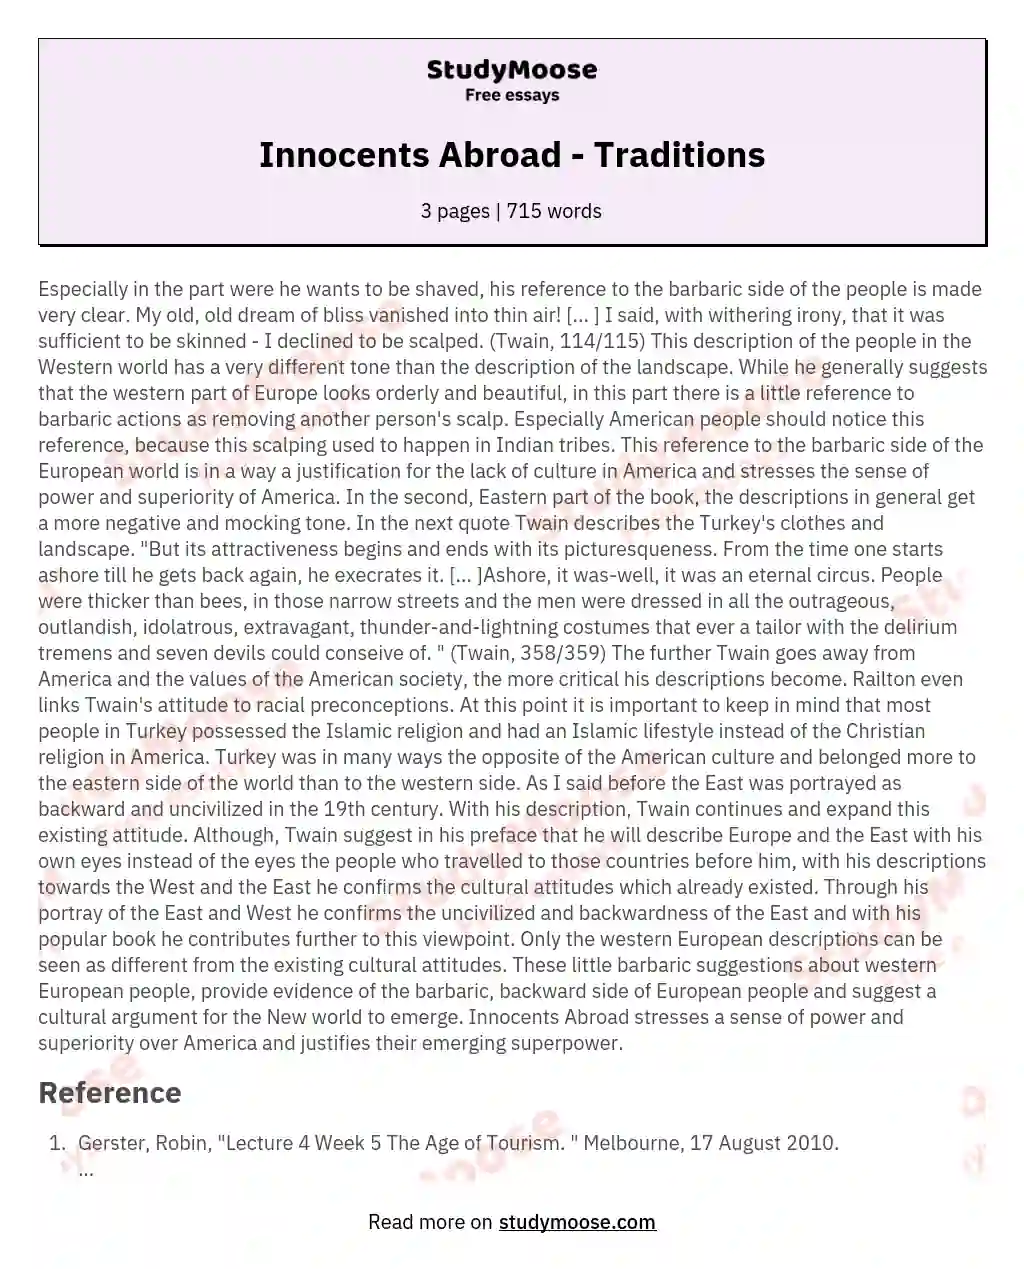 Innocents Abroad - Traditions essay